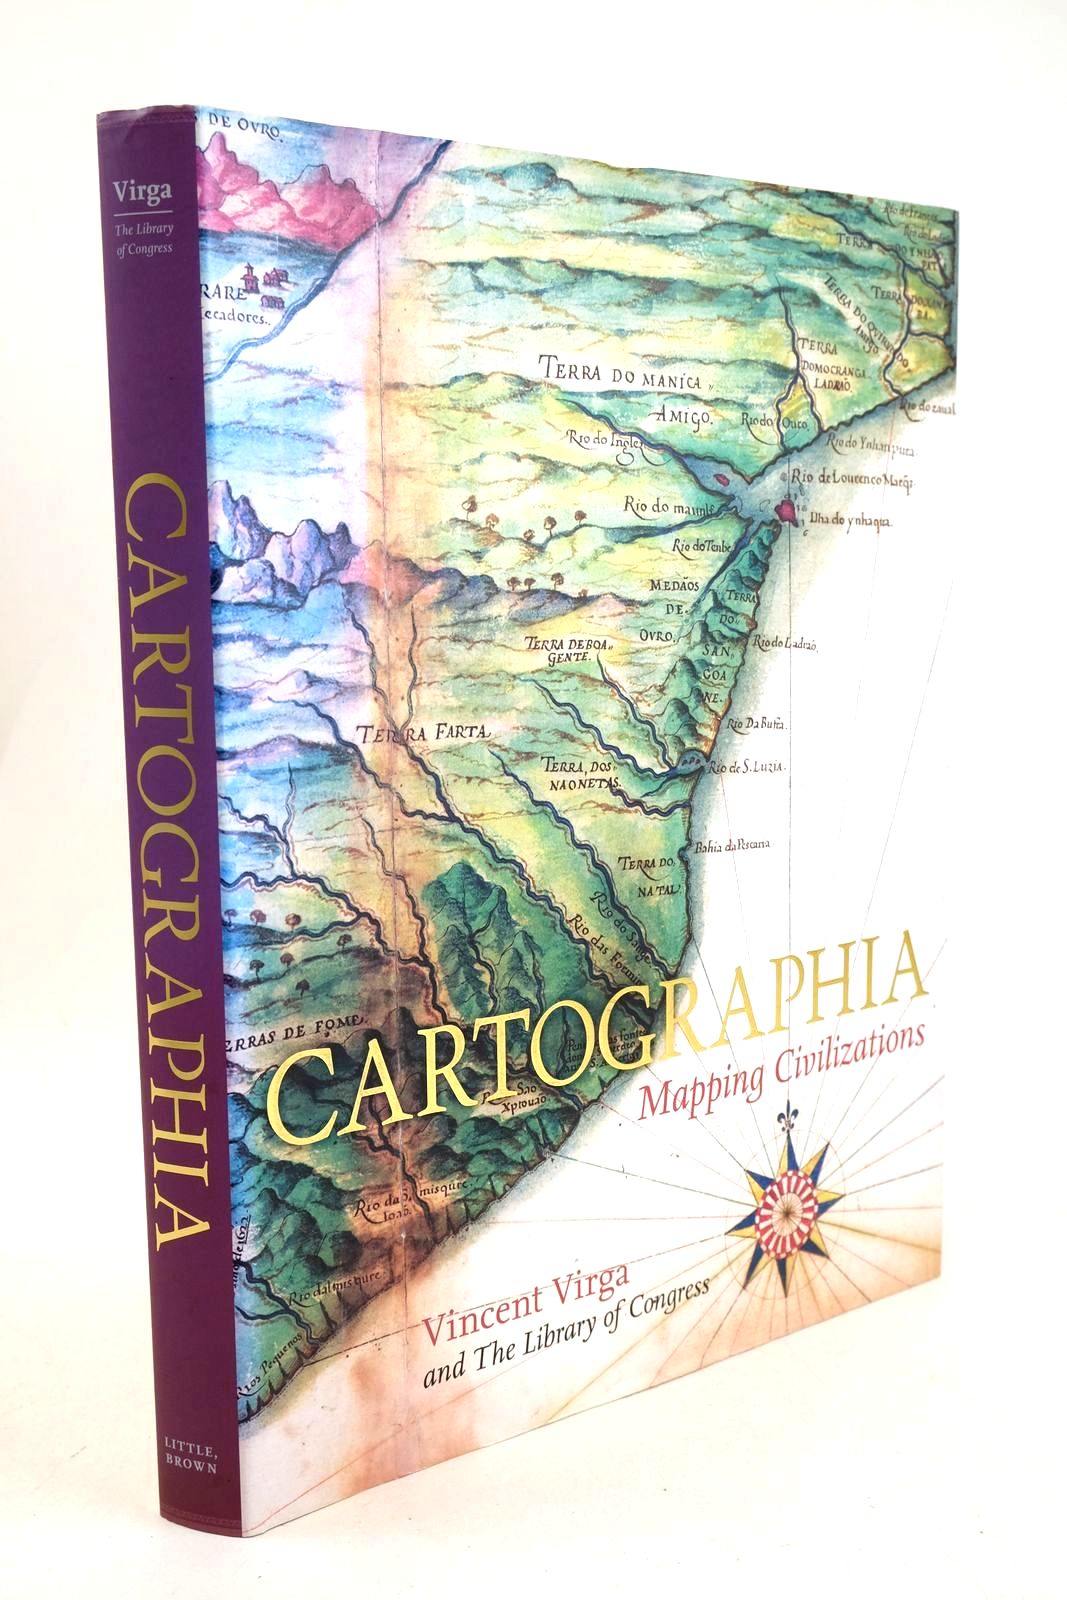 Photo of CARTOGRAPHIA: MAPPING CIVILIZATIONS written by Virga, Vincent published by Little, Brown and Company (STOCK CODE: 1327963)  for sale by Stella & Rose's Books